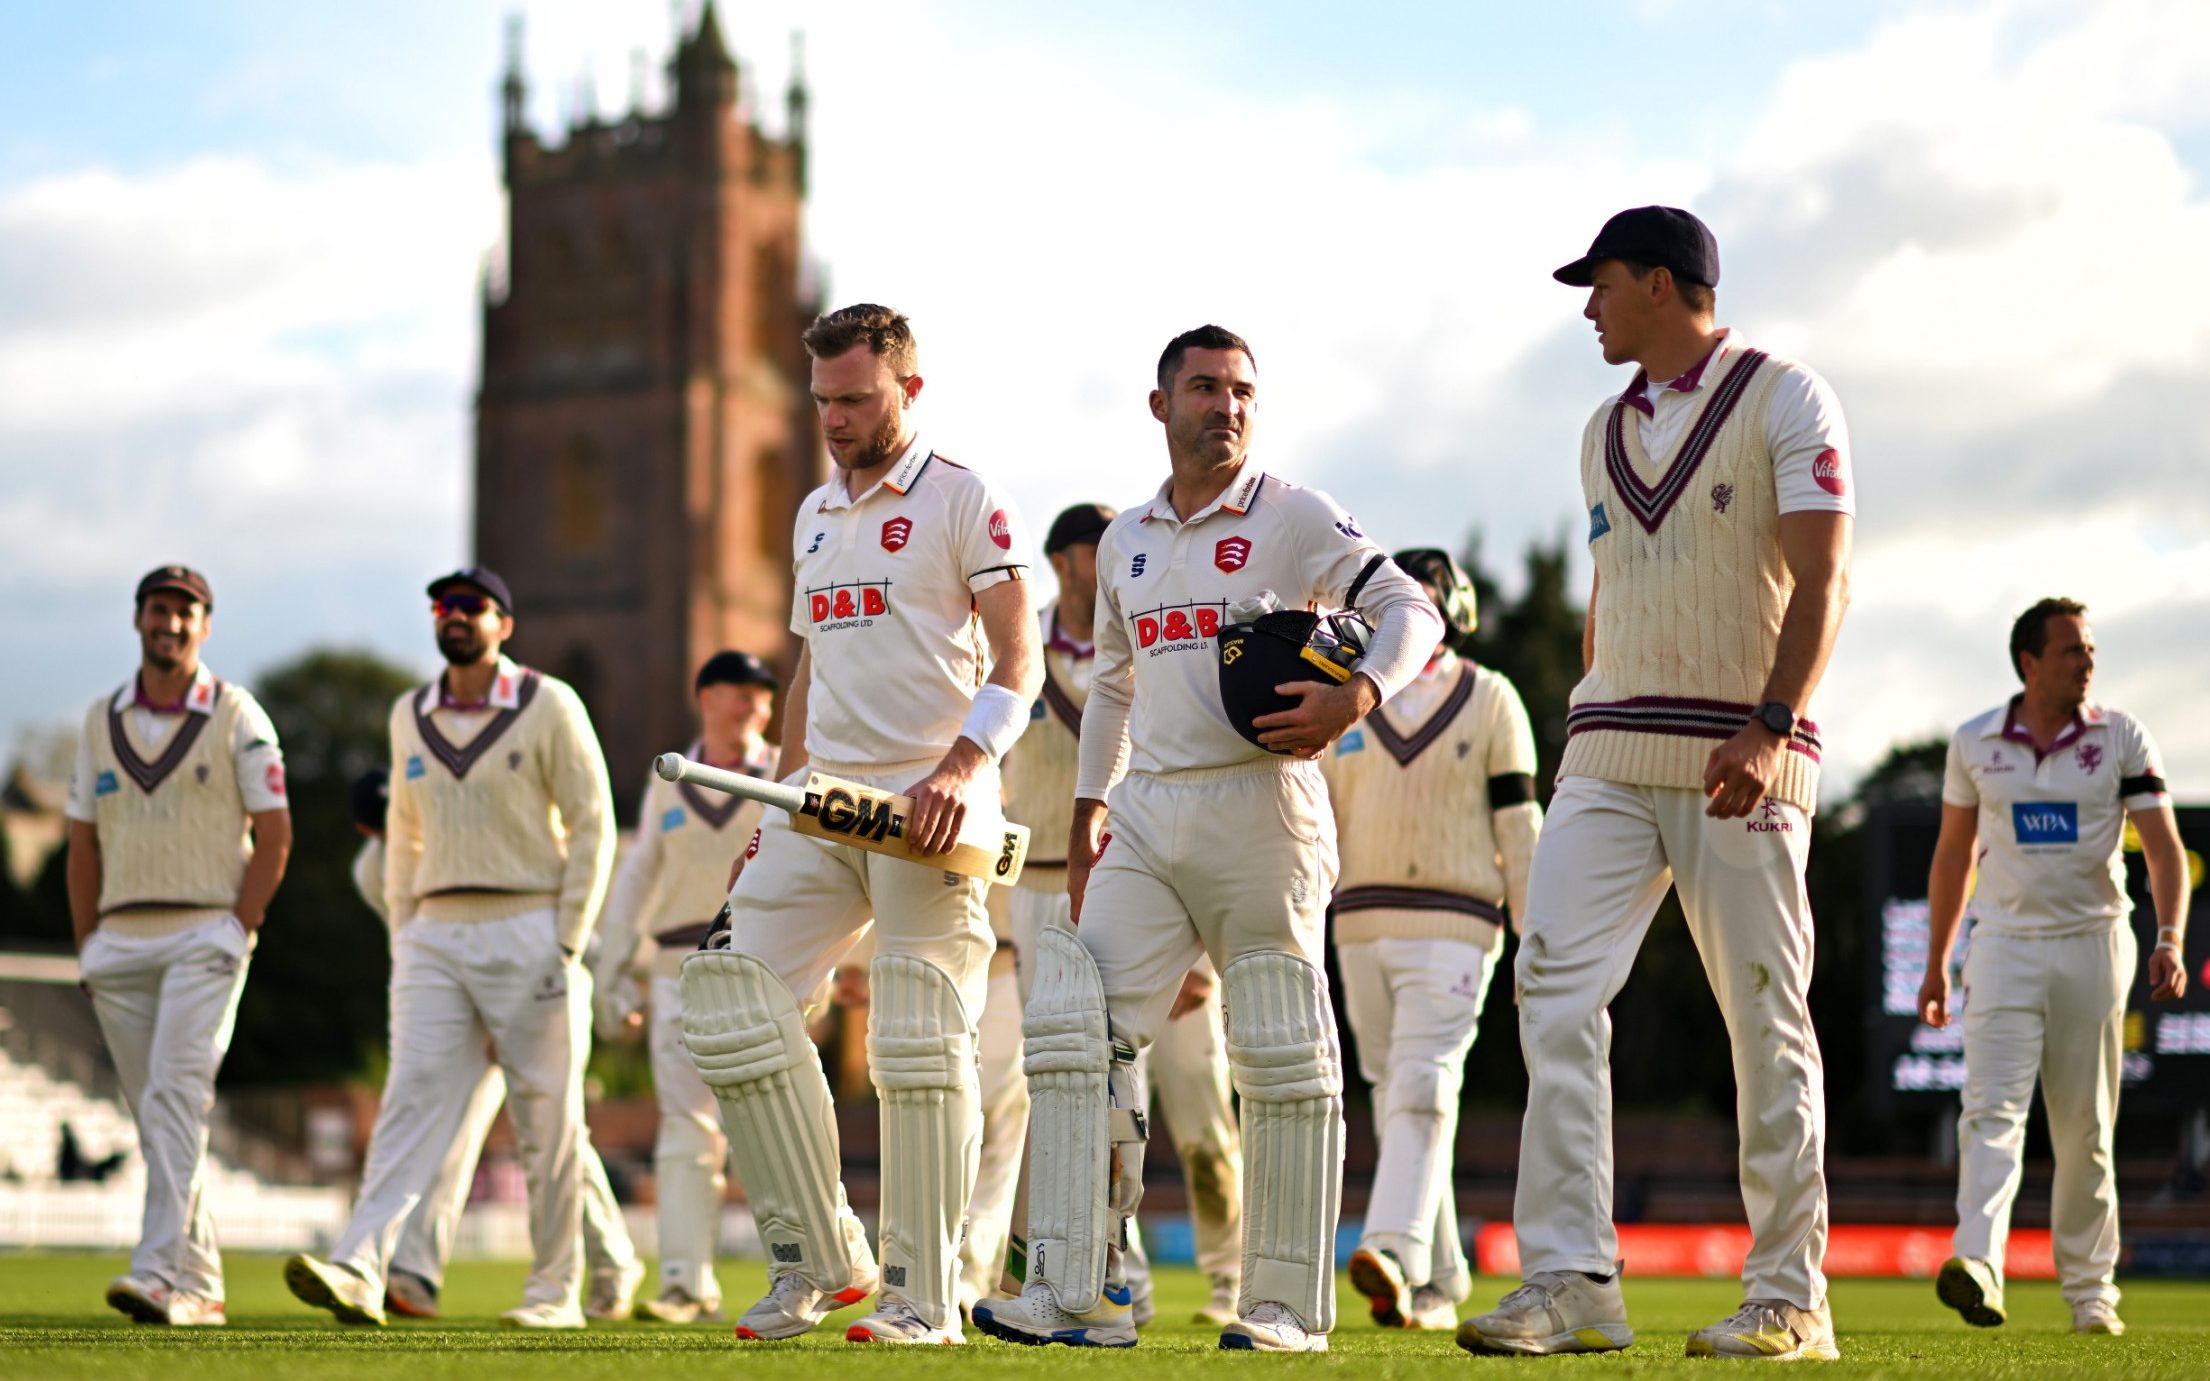 county cricket is getting a seismic opportunity – it must not blow it